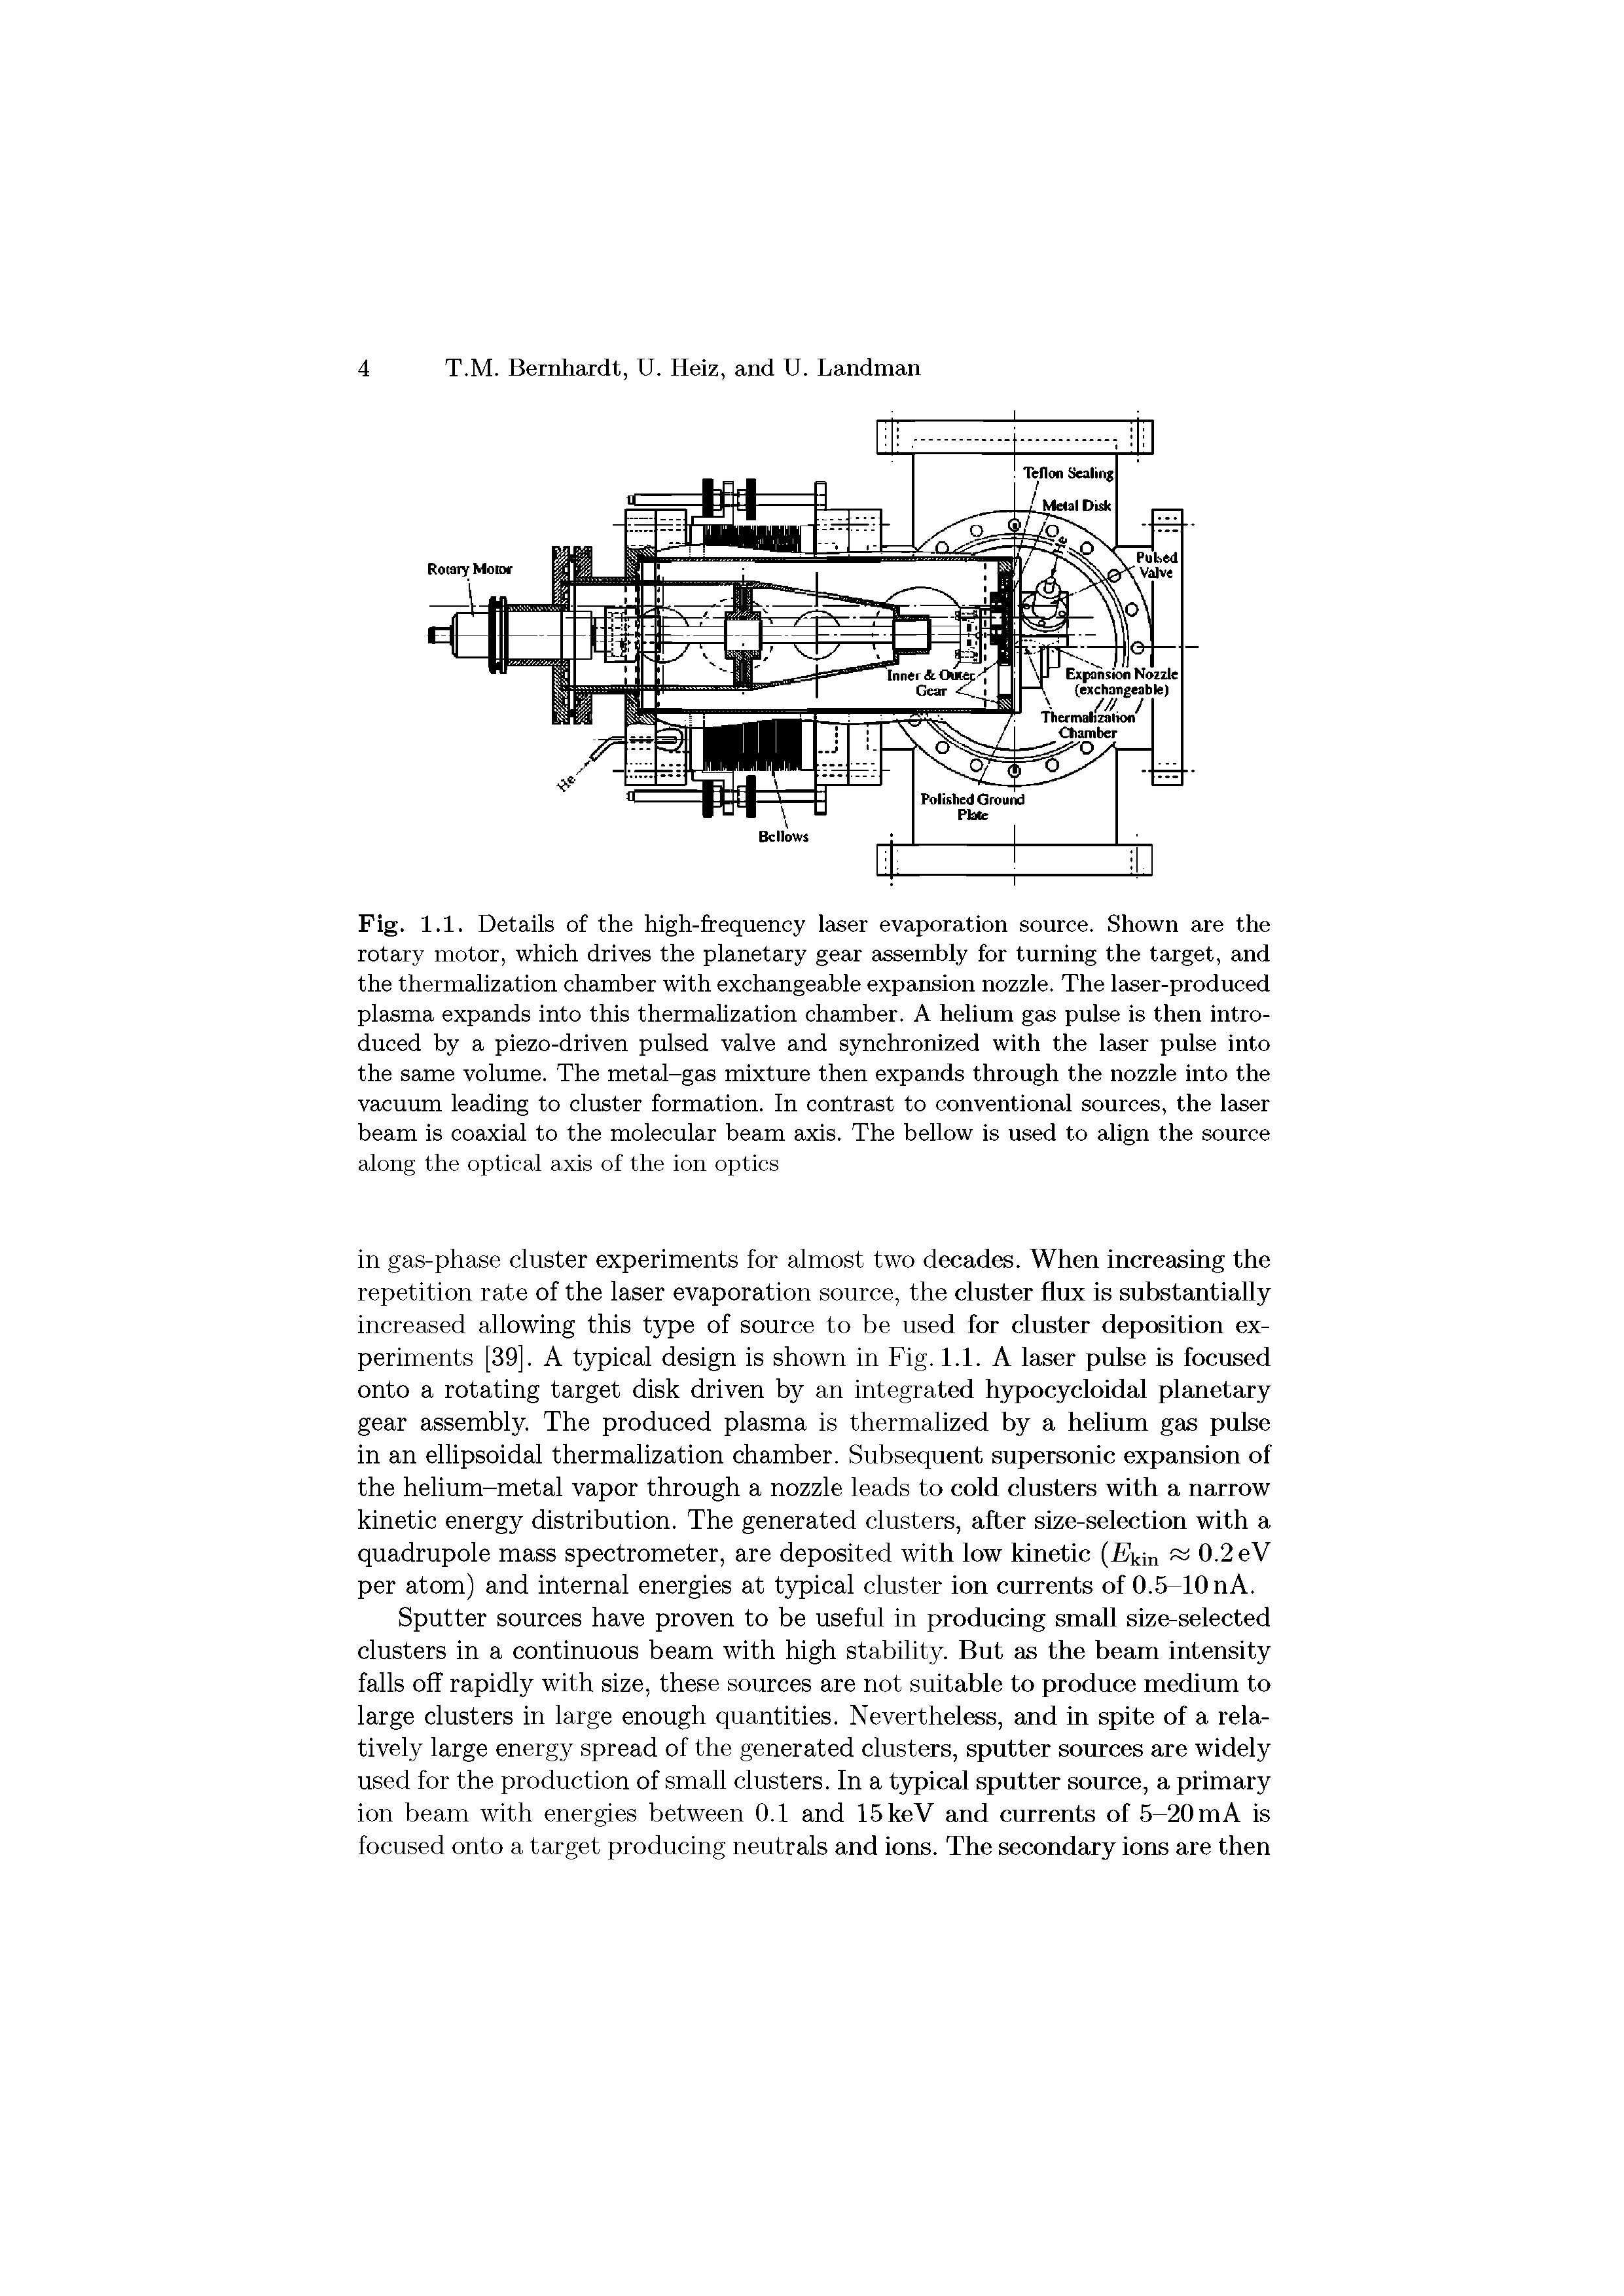 Fig. 1.1. Details of the high-frequency iaser evaporation source. Shown are the rotary motor, which drives the planetary gear assembly for turning the target, and the thermalization chamber with exchangeable expansion nozzie. The iaser-produced plasma expands into this thermalization chamber. A heiium gas puise is then introduced by a piezo-driven pulsed valve and synchronized with the iaser puise into the same volume. The metal-gas mixture then expands through the nozzie into the vacuum leading to cluster formation. In contrast to conventional sources, the laser beam is coaxial to the molecular beam axis. The bellow is used to aiign the source along the optical axis of the ion optics...